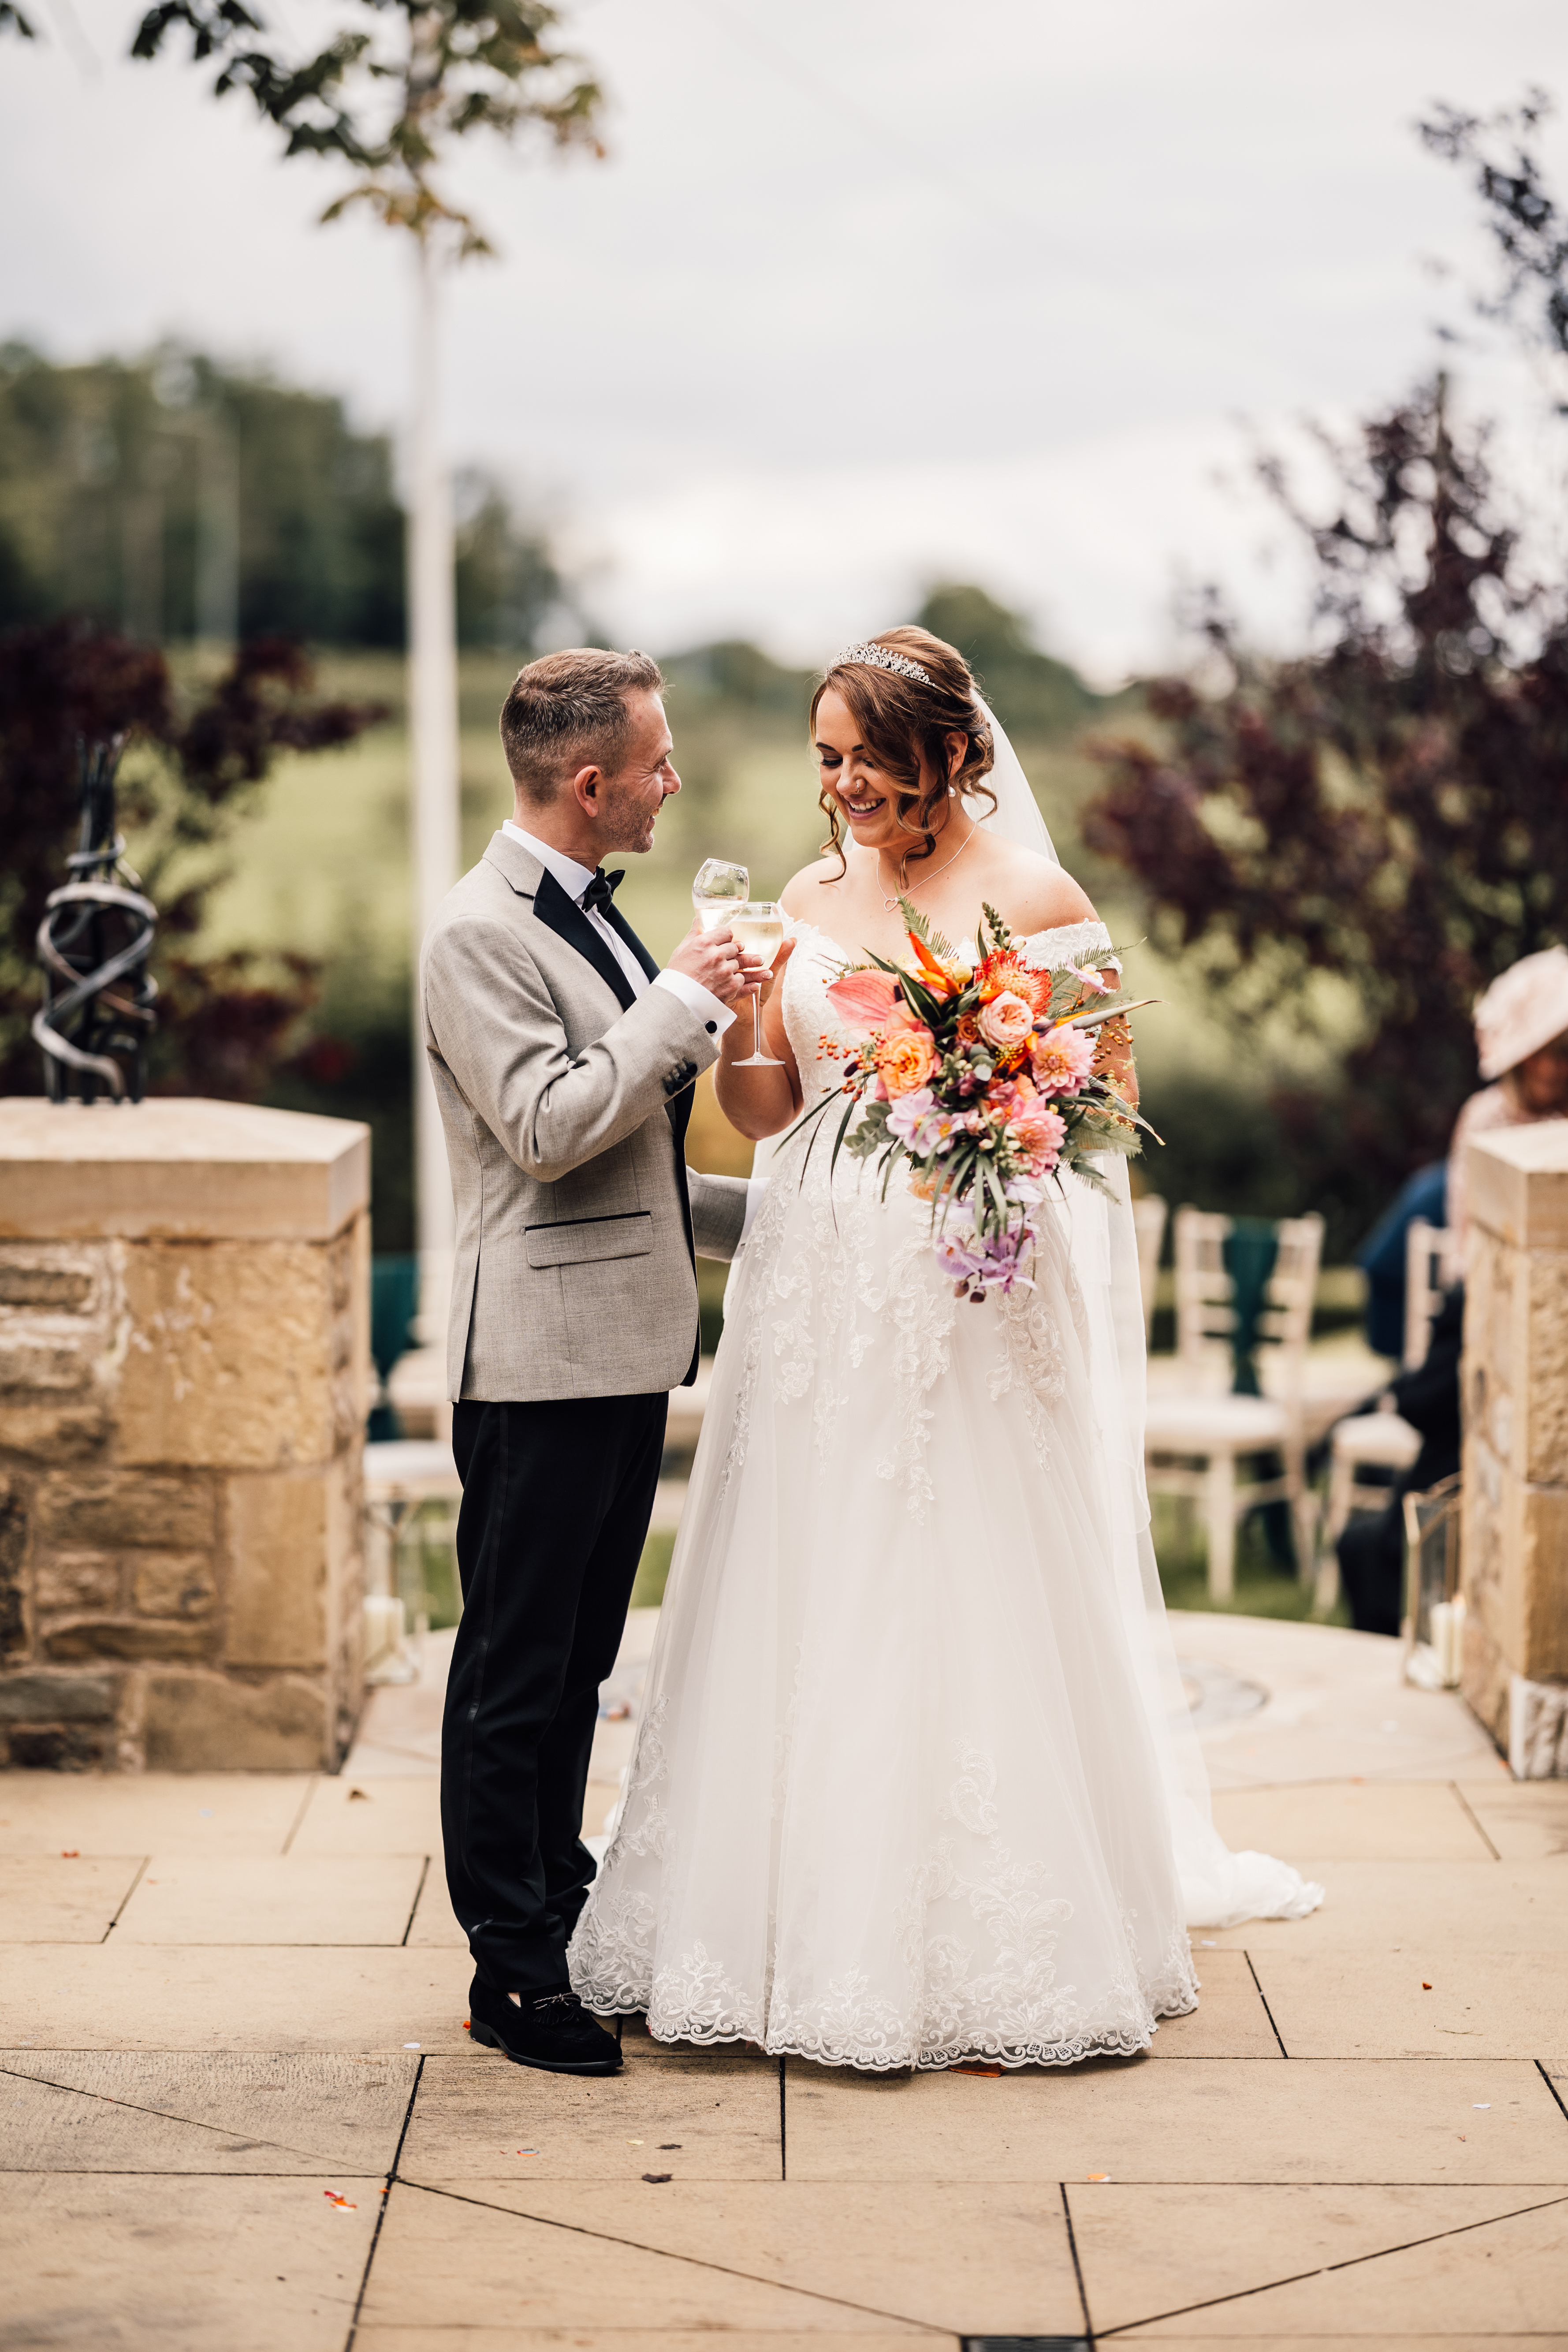 Lauren and Craig on their wedding day in the Ribble Valley